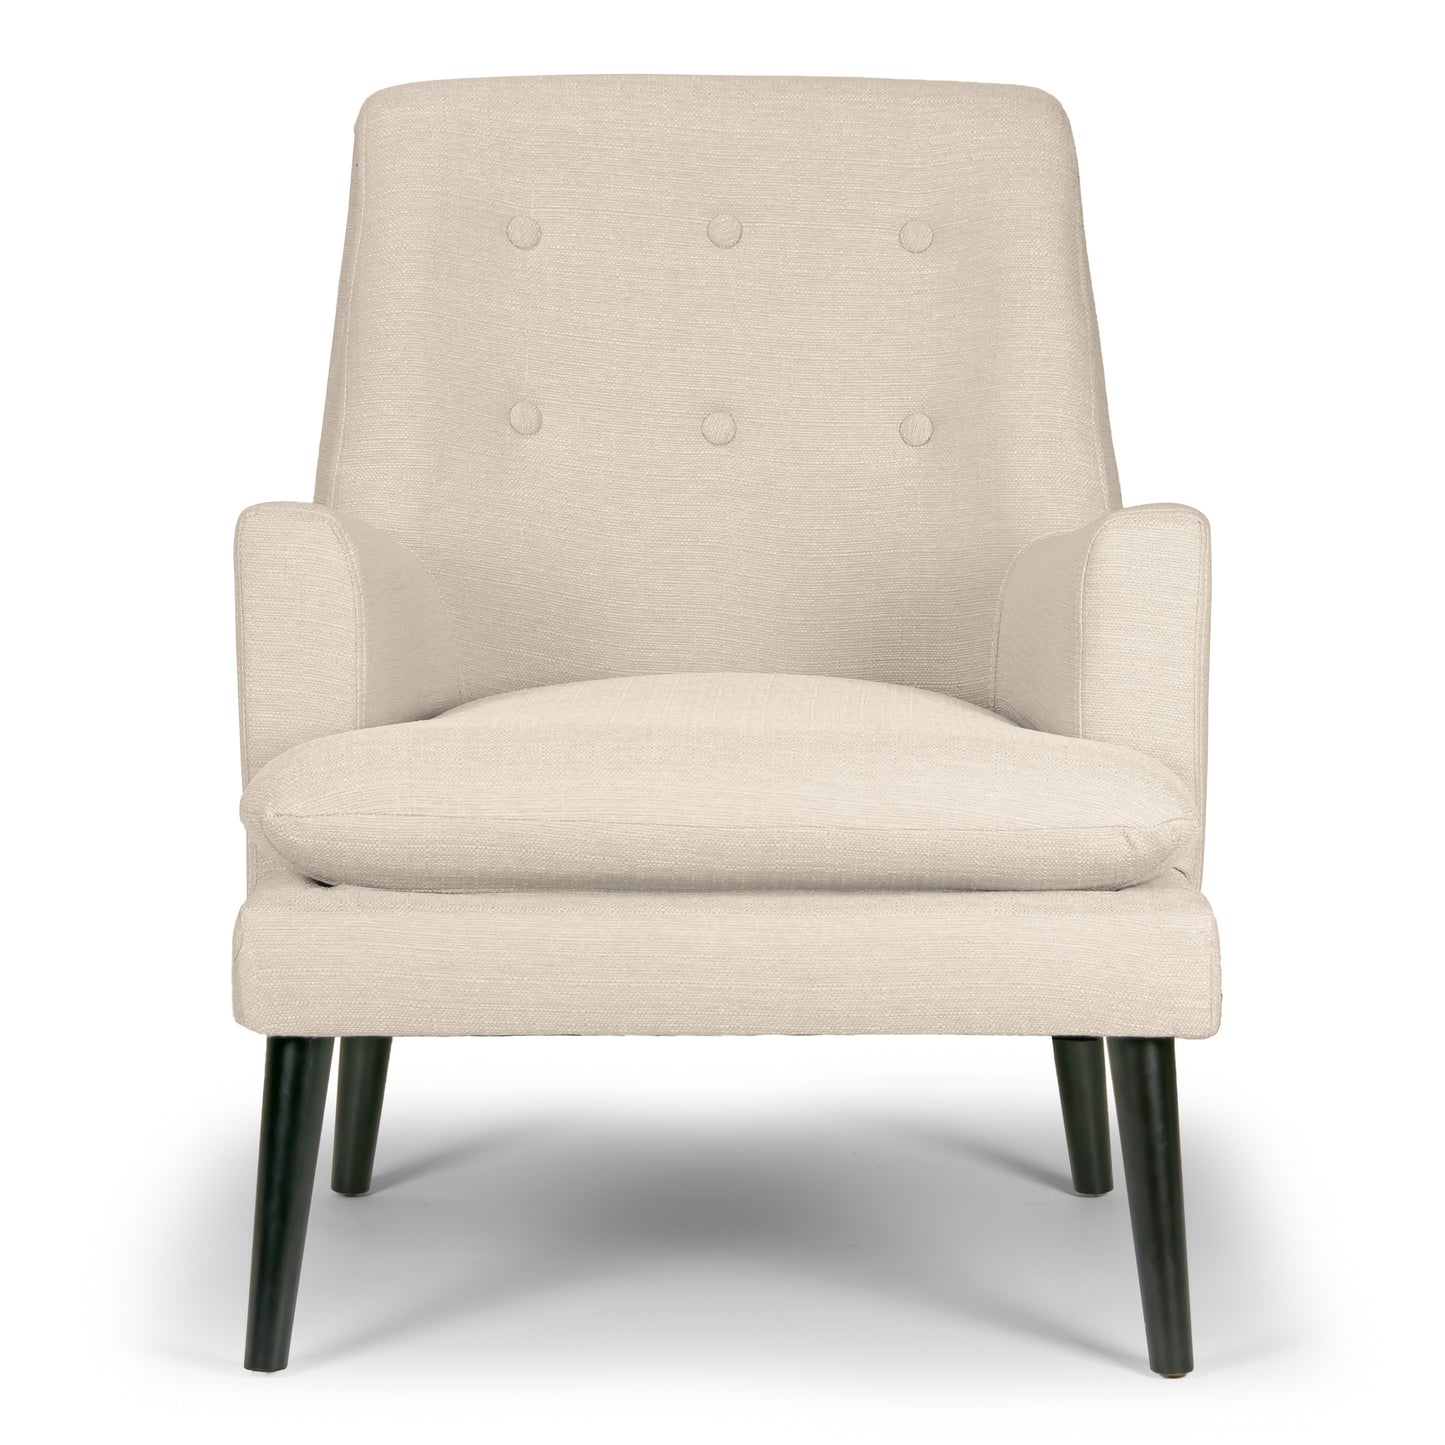 Alexa Beige Fabric Arm Chair with Button Tufting and Square Back